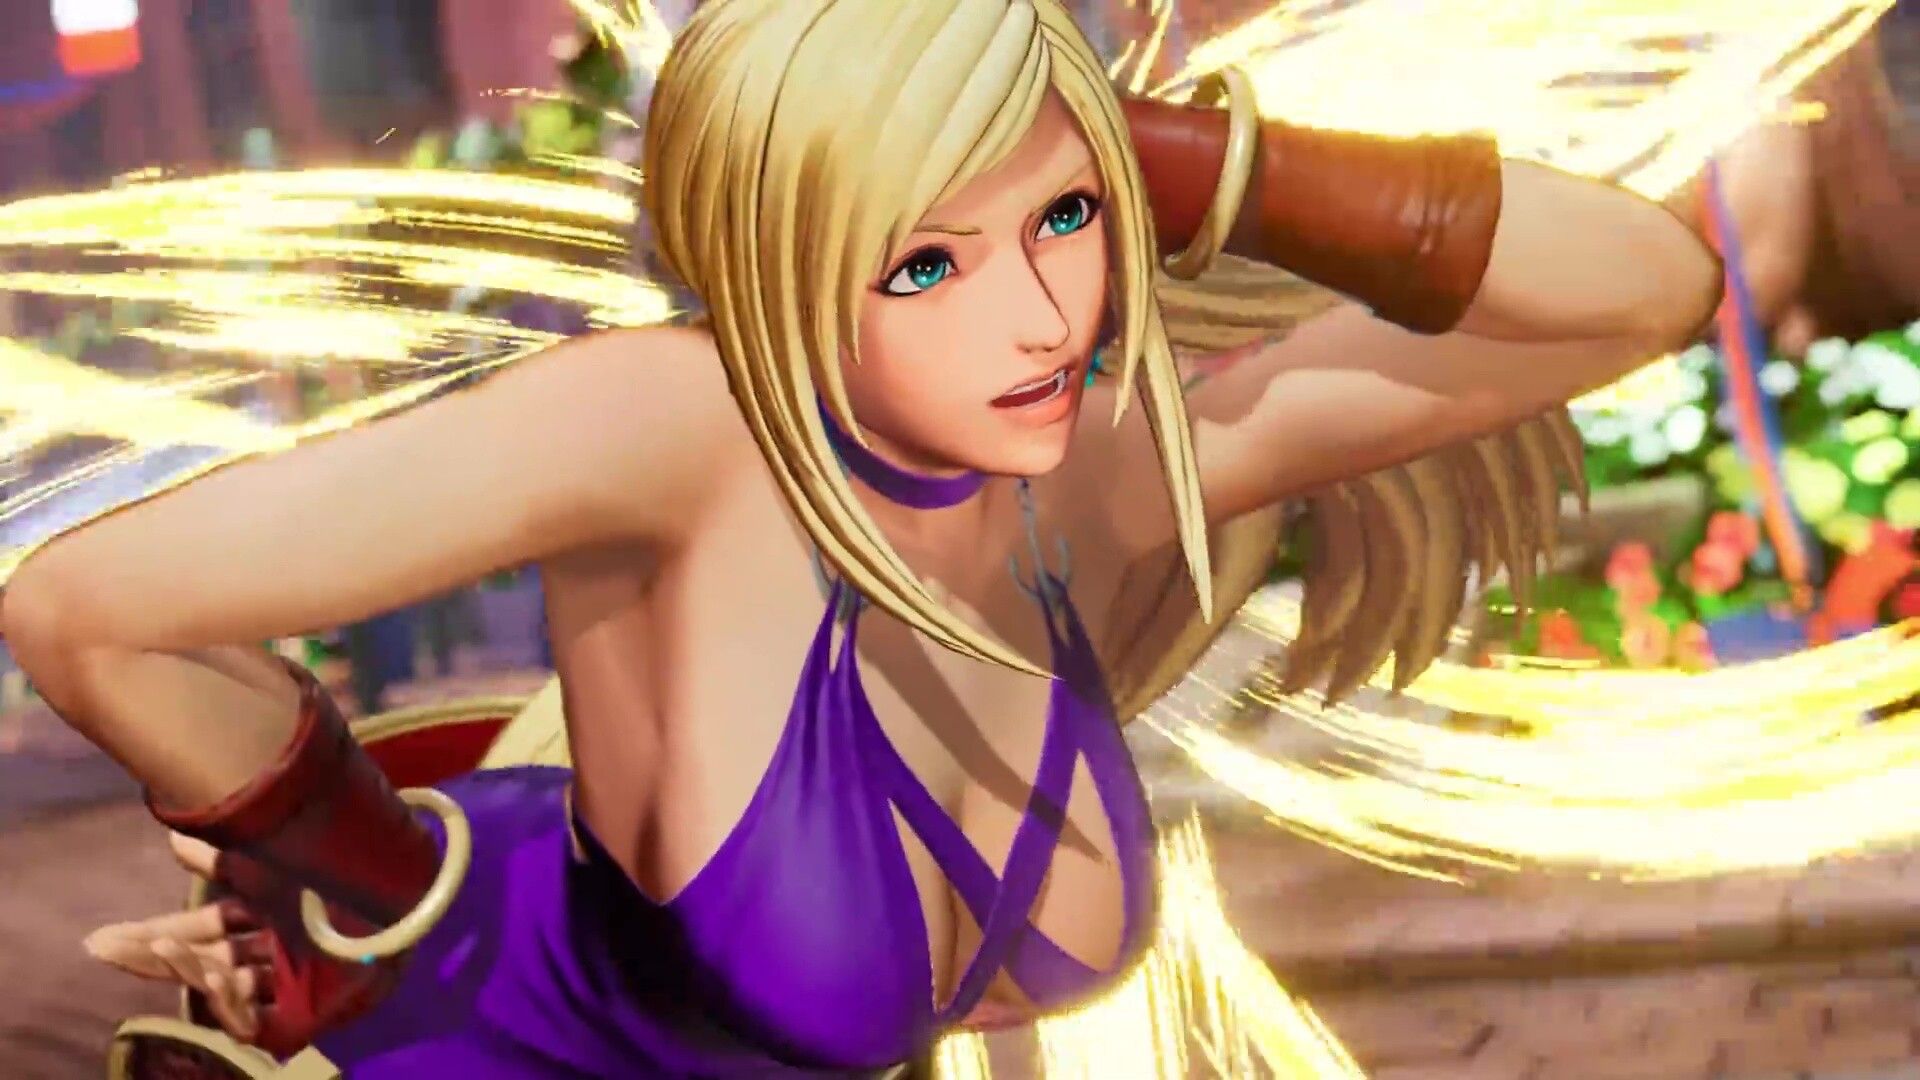 THE KING OF FIGHTERS XV B. Jenny enters the DLC in an erotic dress with and rounded thighs 14